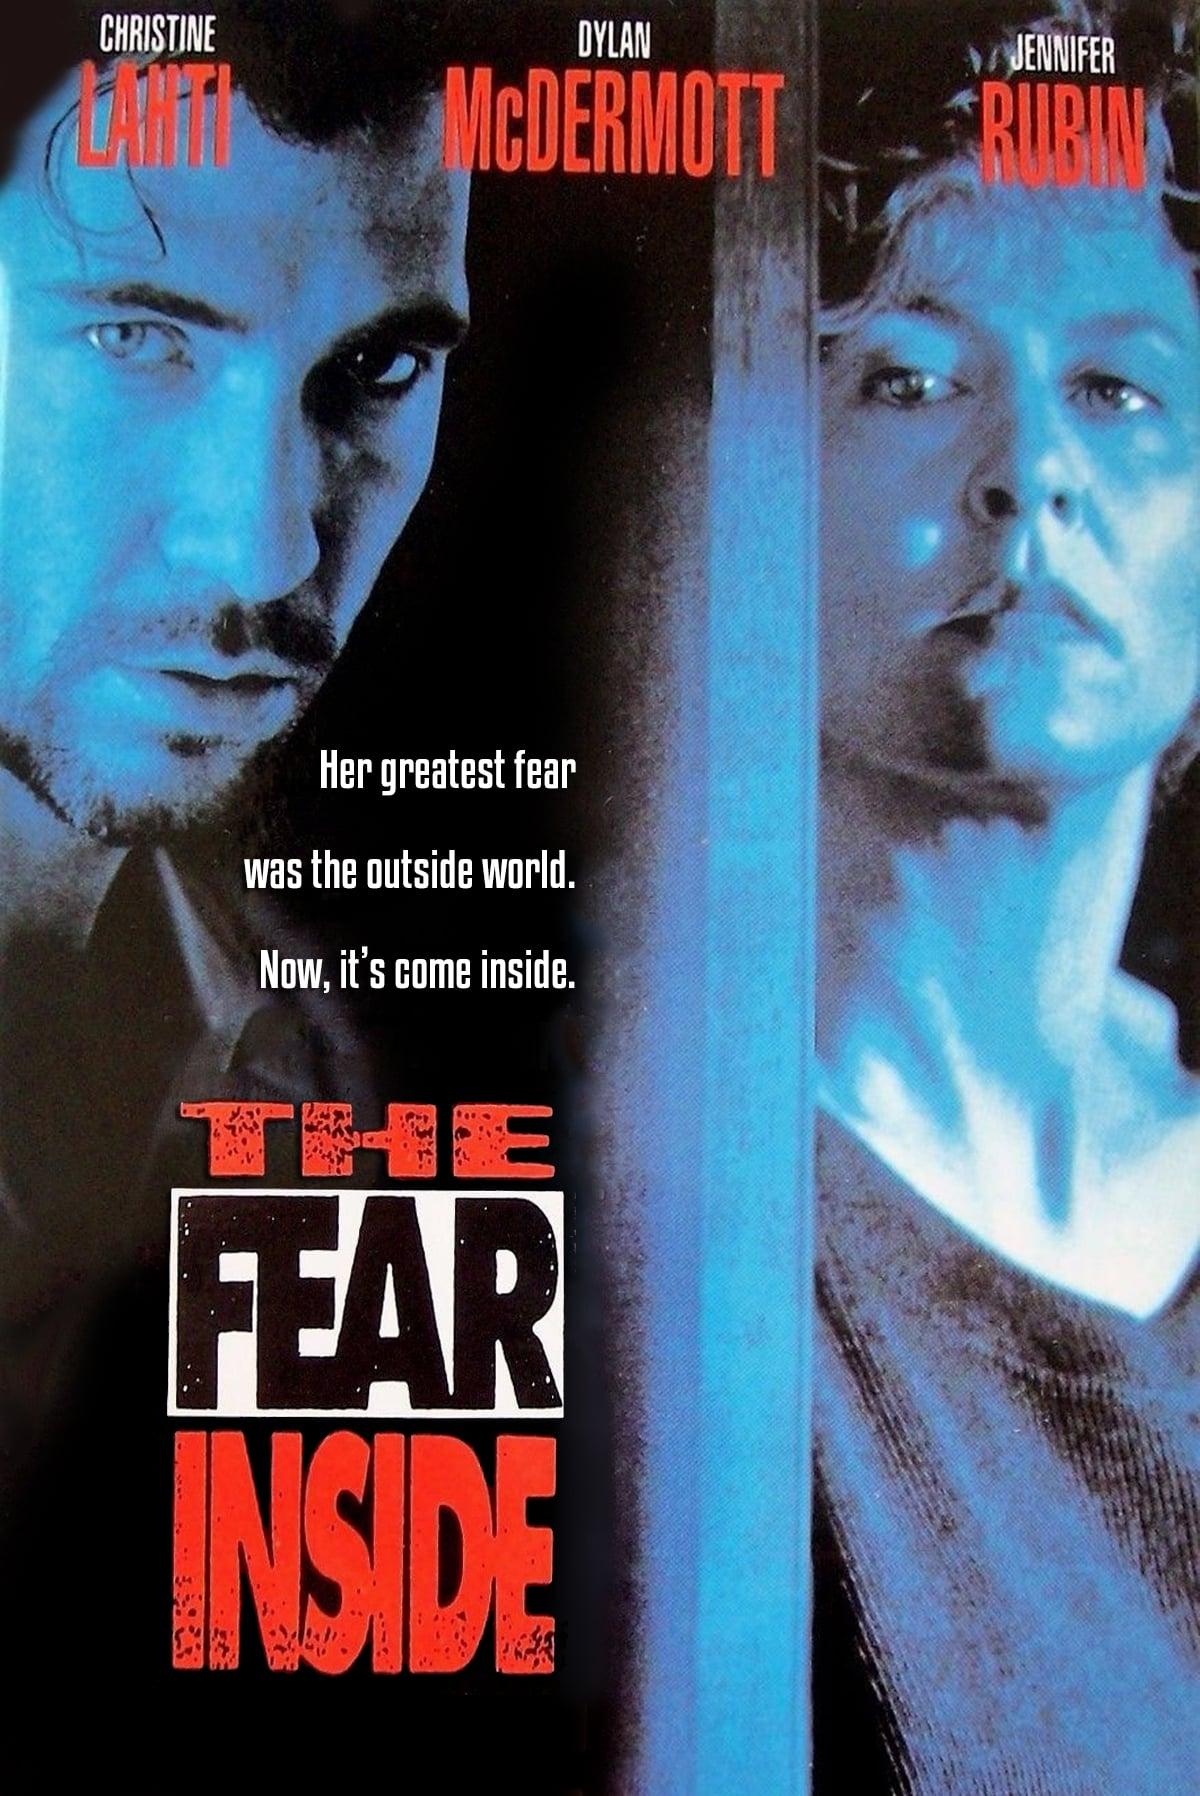 The Fear Inside poster